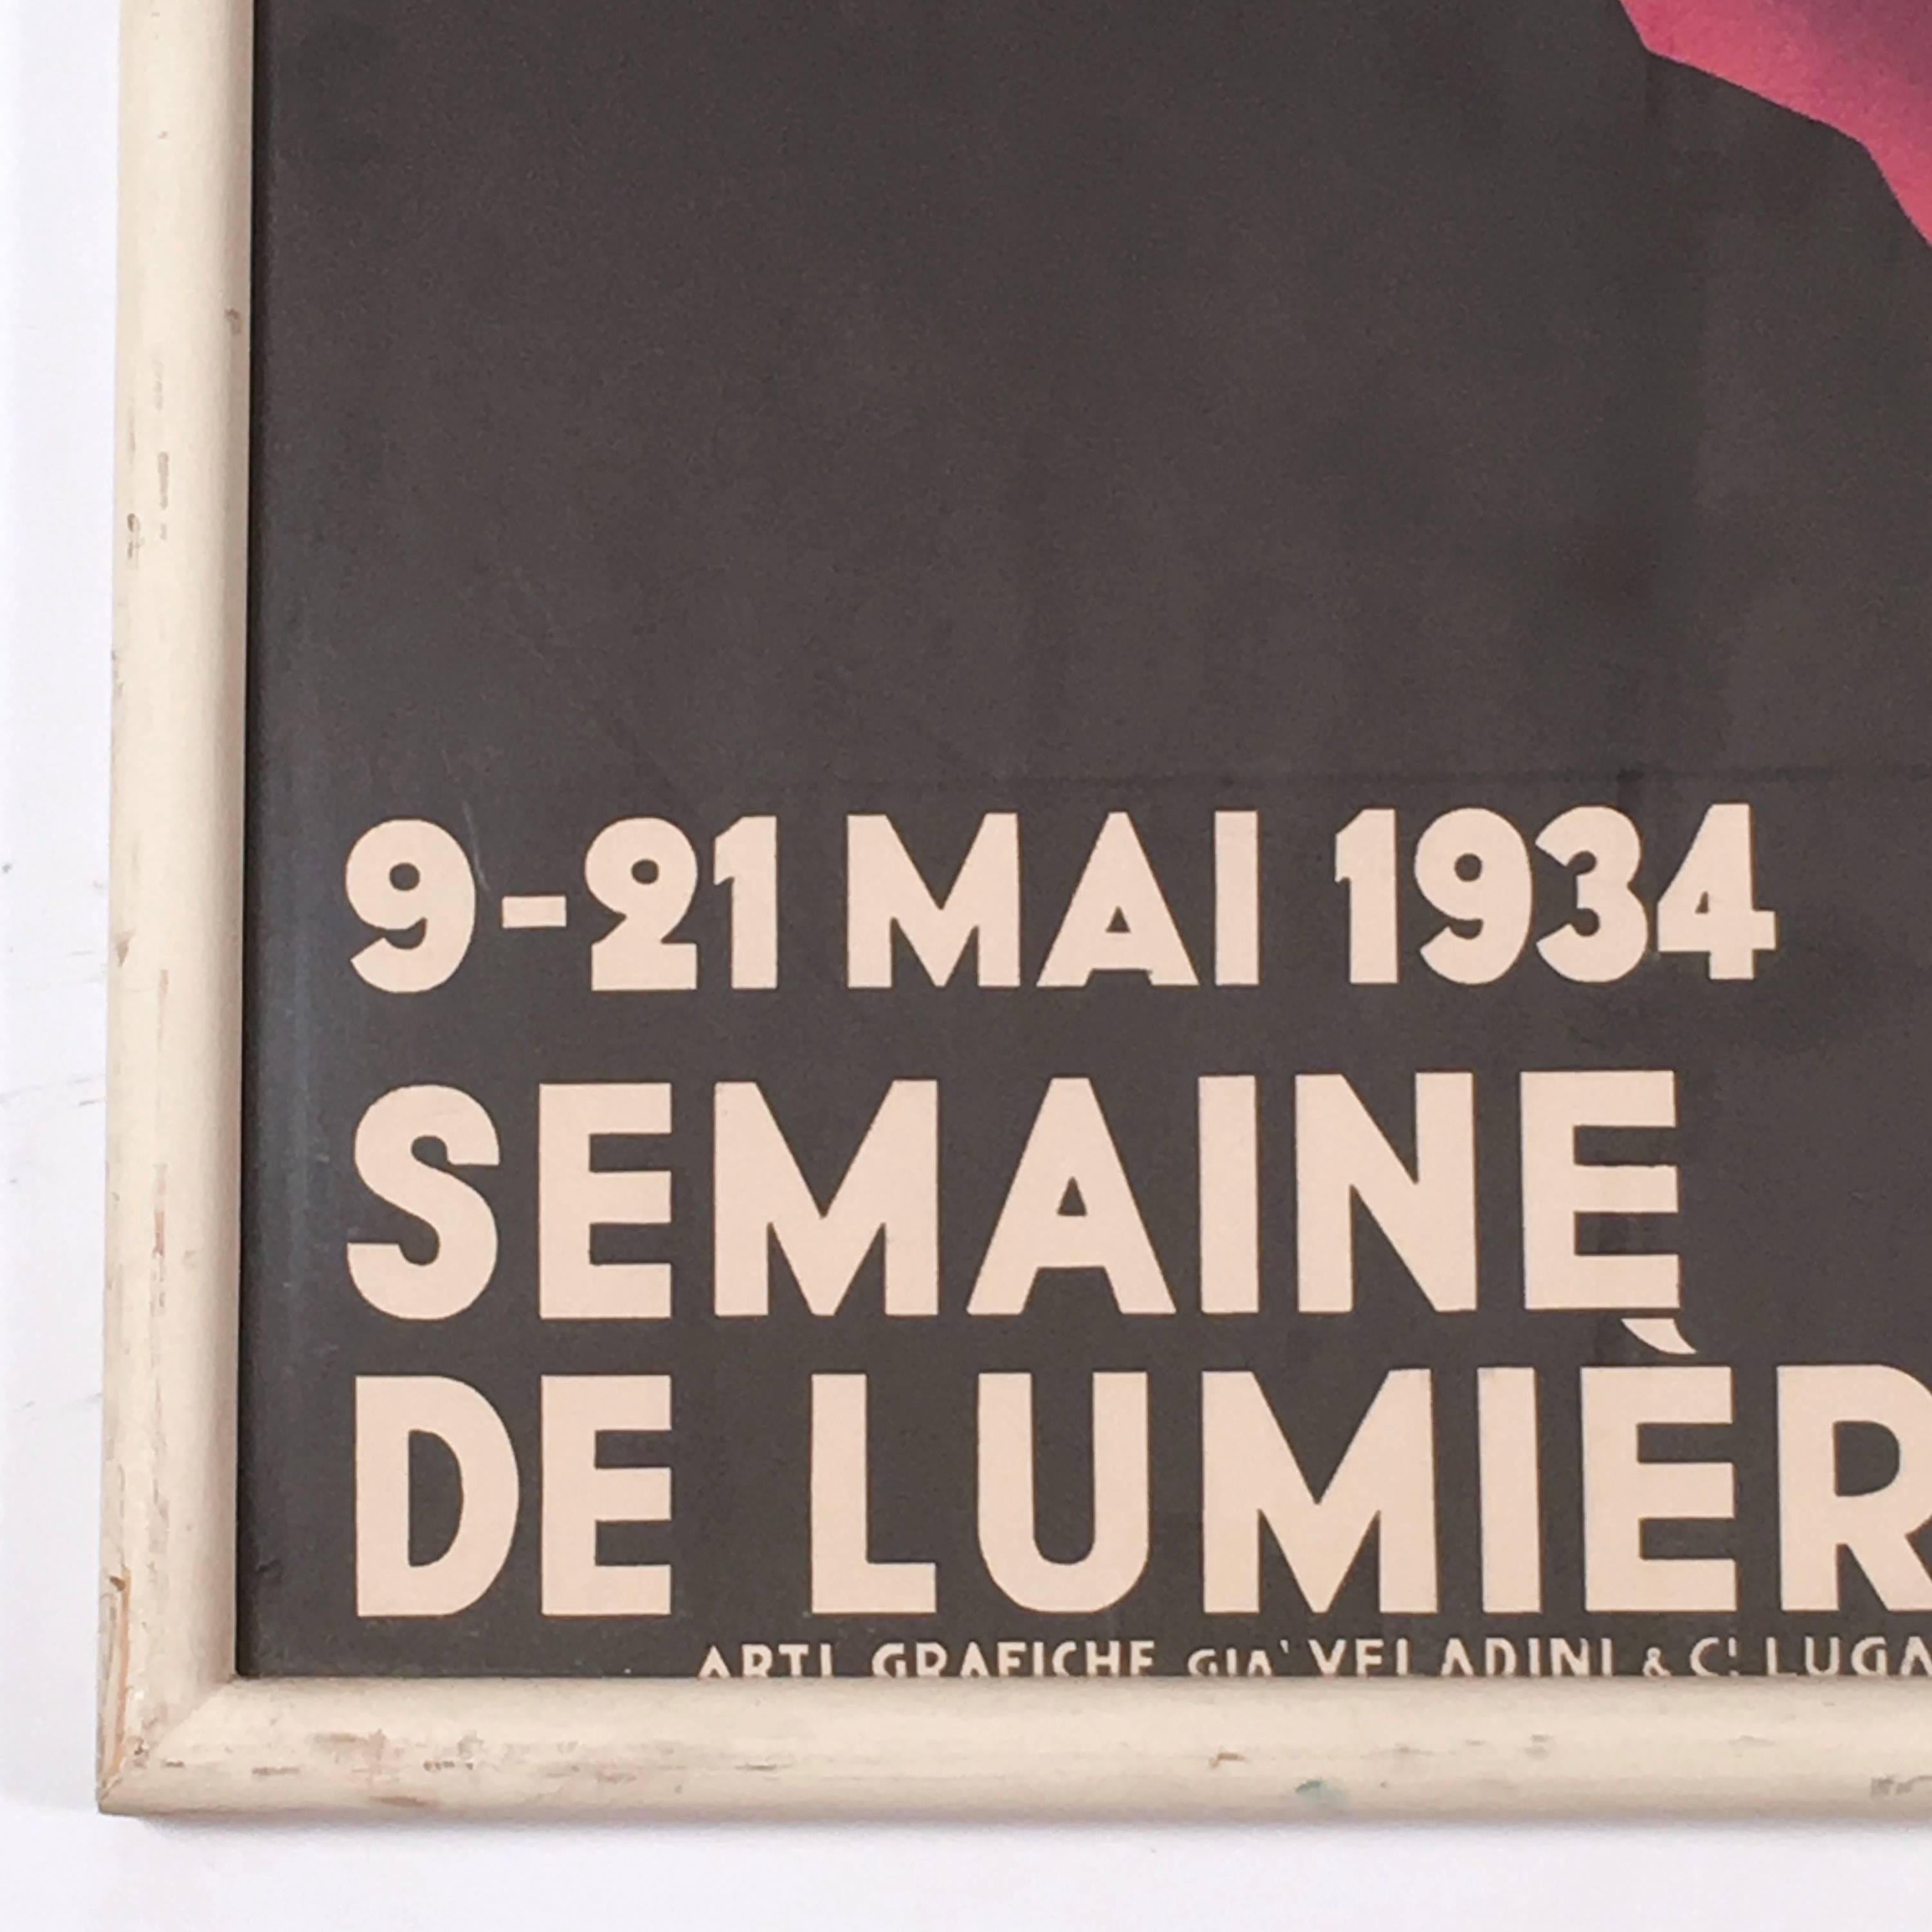 An original  1934 film festival  poster advertising SELU, the Semaine de Lumiere (week of light) festival on Lake Lugano, 9-21 May 1934, lithograph on paper by Bolt, depicting a pink mountain, with yellow light at the summit, against a black